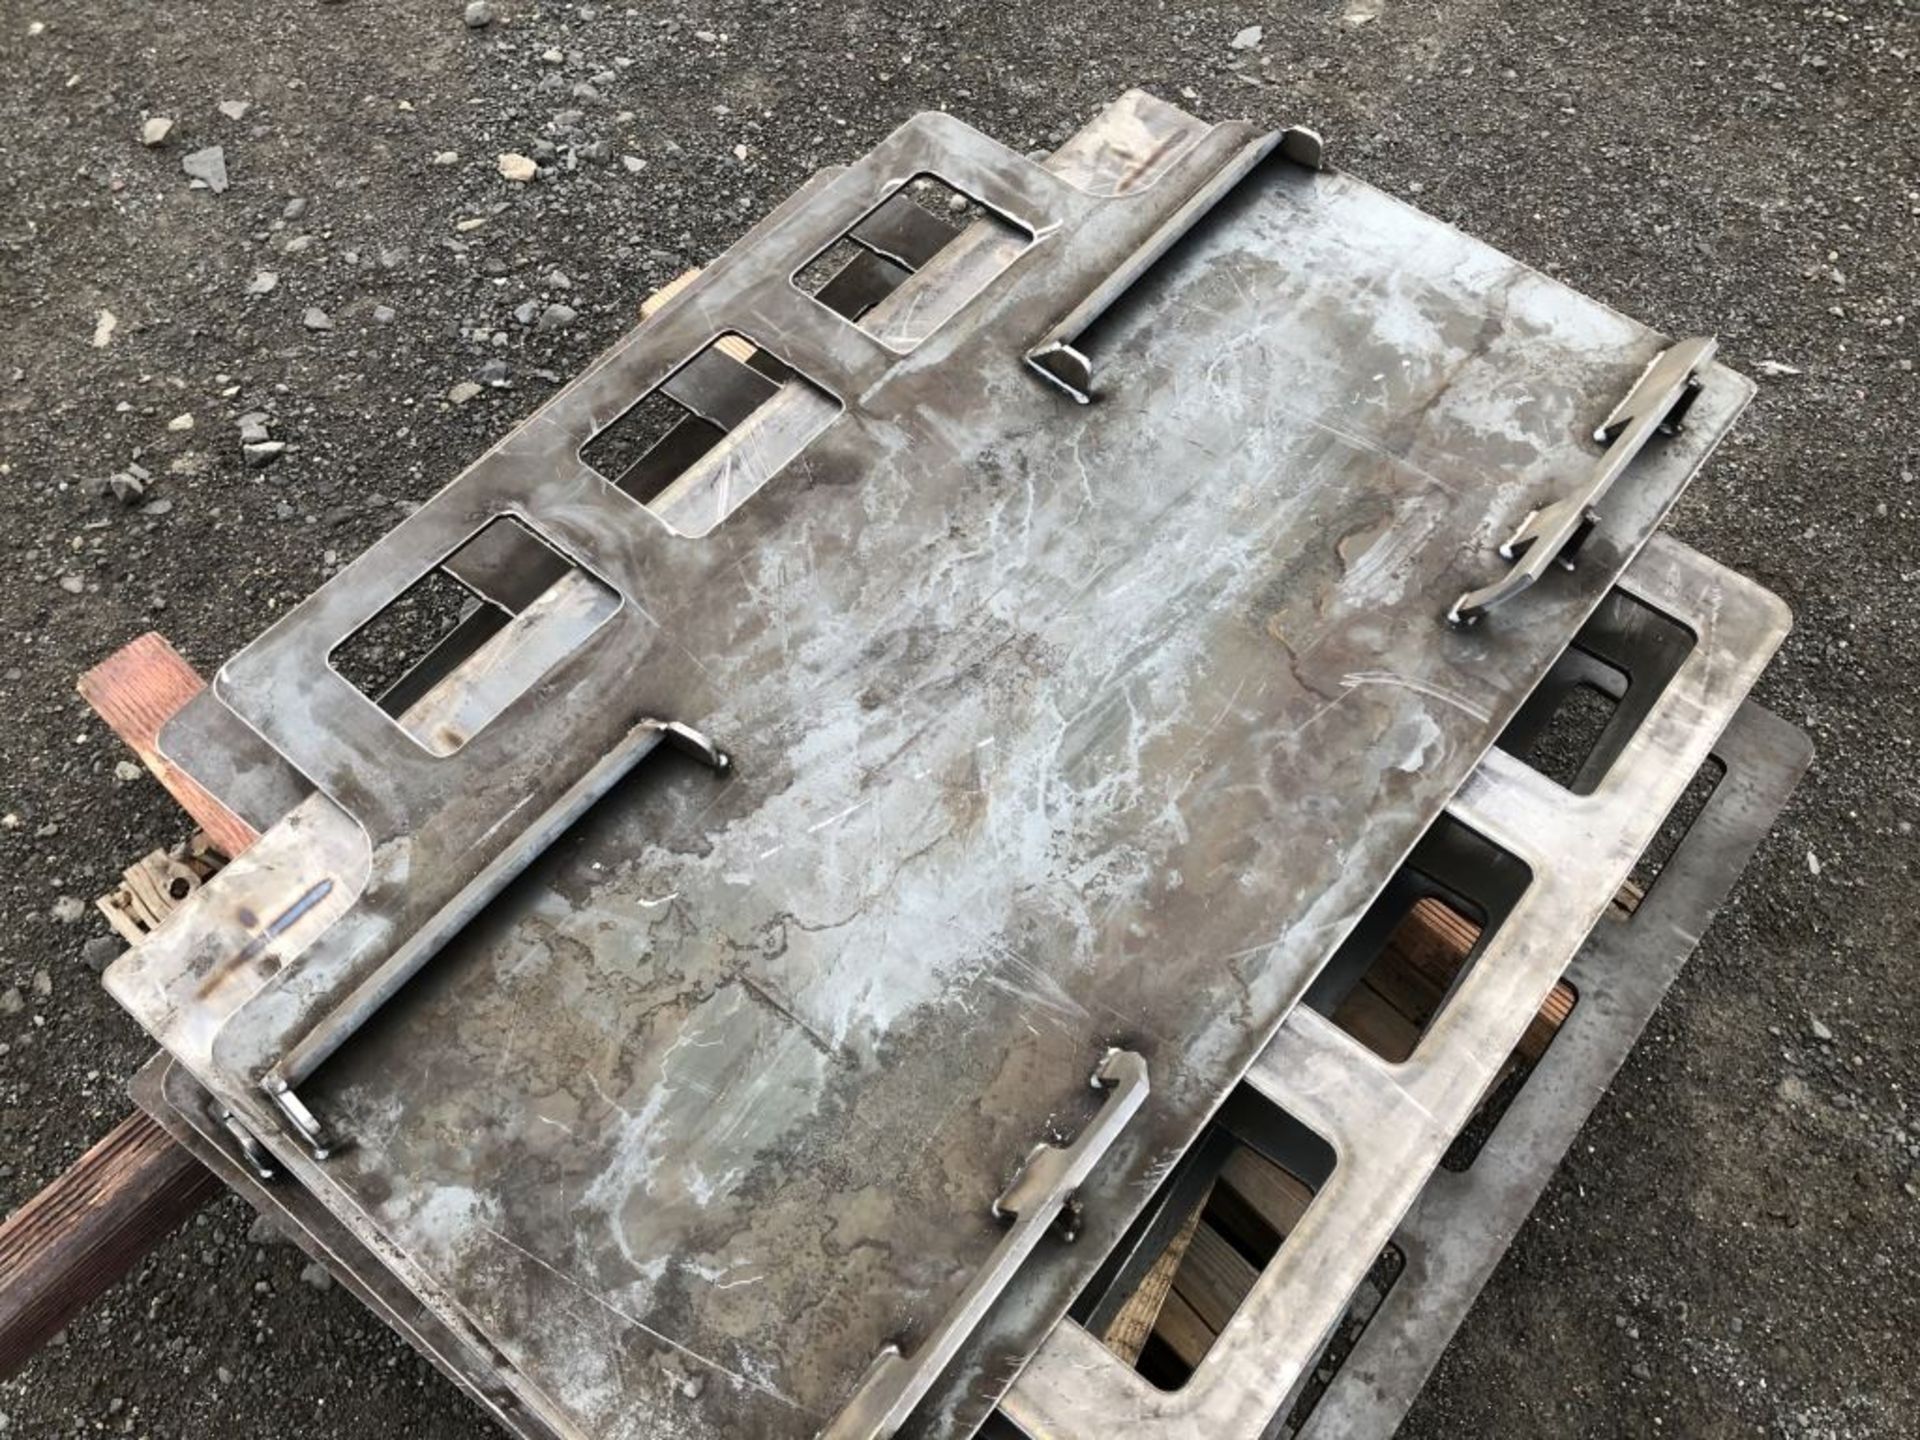 2020 Skid Steer Attachment Plate w/Guard - Image 3 of 3